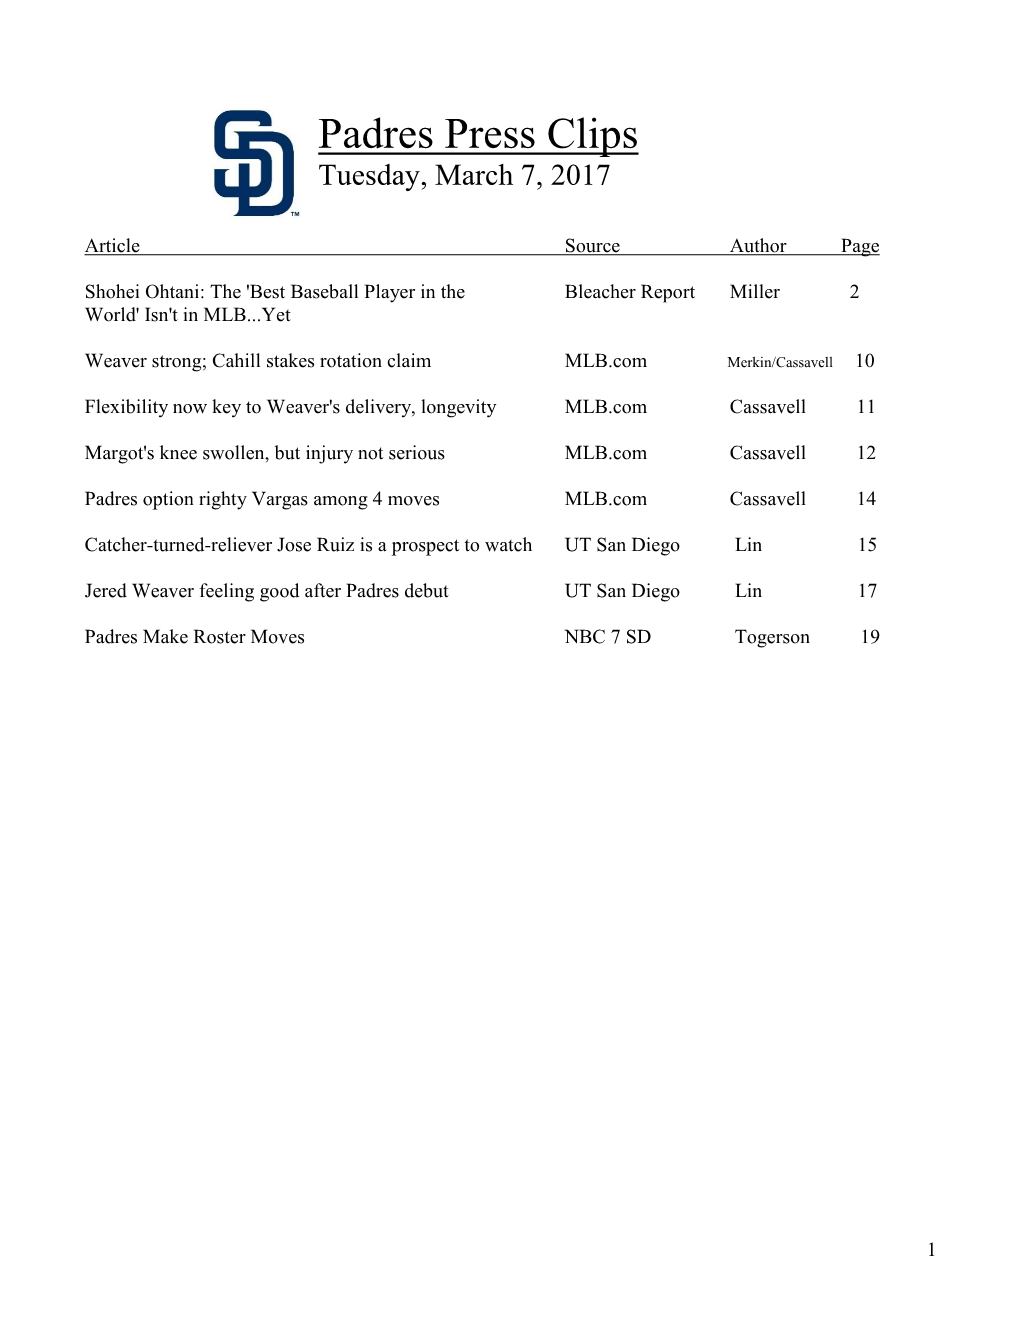 Padres Press Clips Tuesday, March 7, 2017